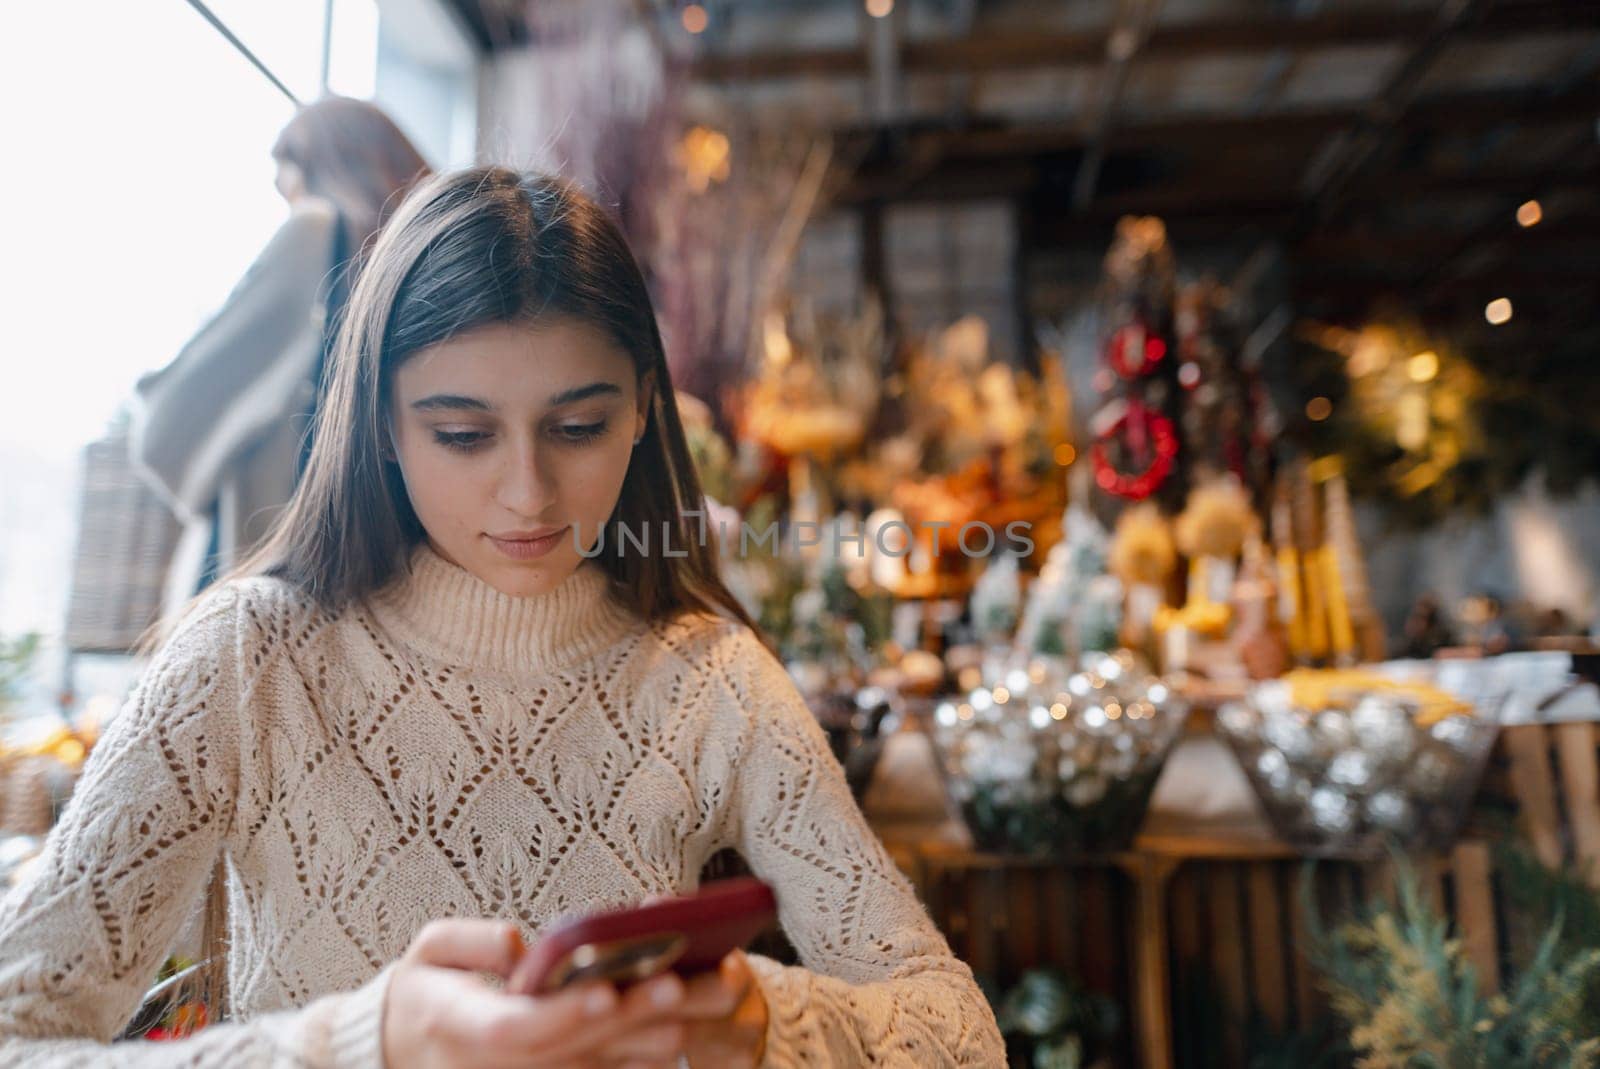 A striking, vibrant young woman checking out New Year's decorations with her smartphone. High quality photo